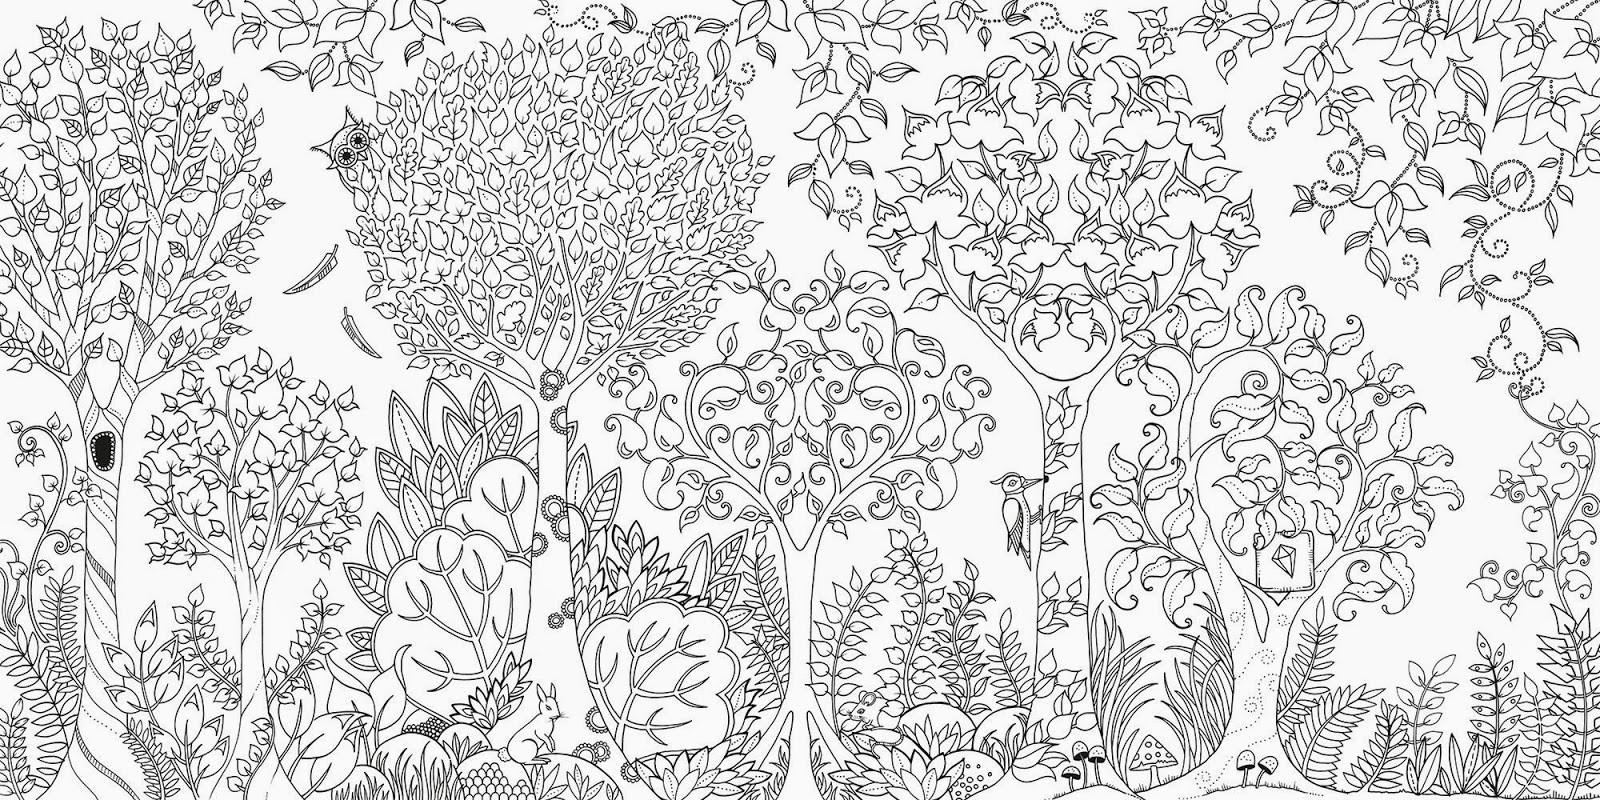 Forest Coloring Pages For Adults
 SurLaLune Fairy Tales Blog Art Thursday Enchanted Forest